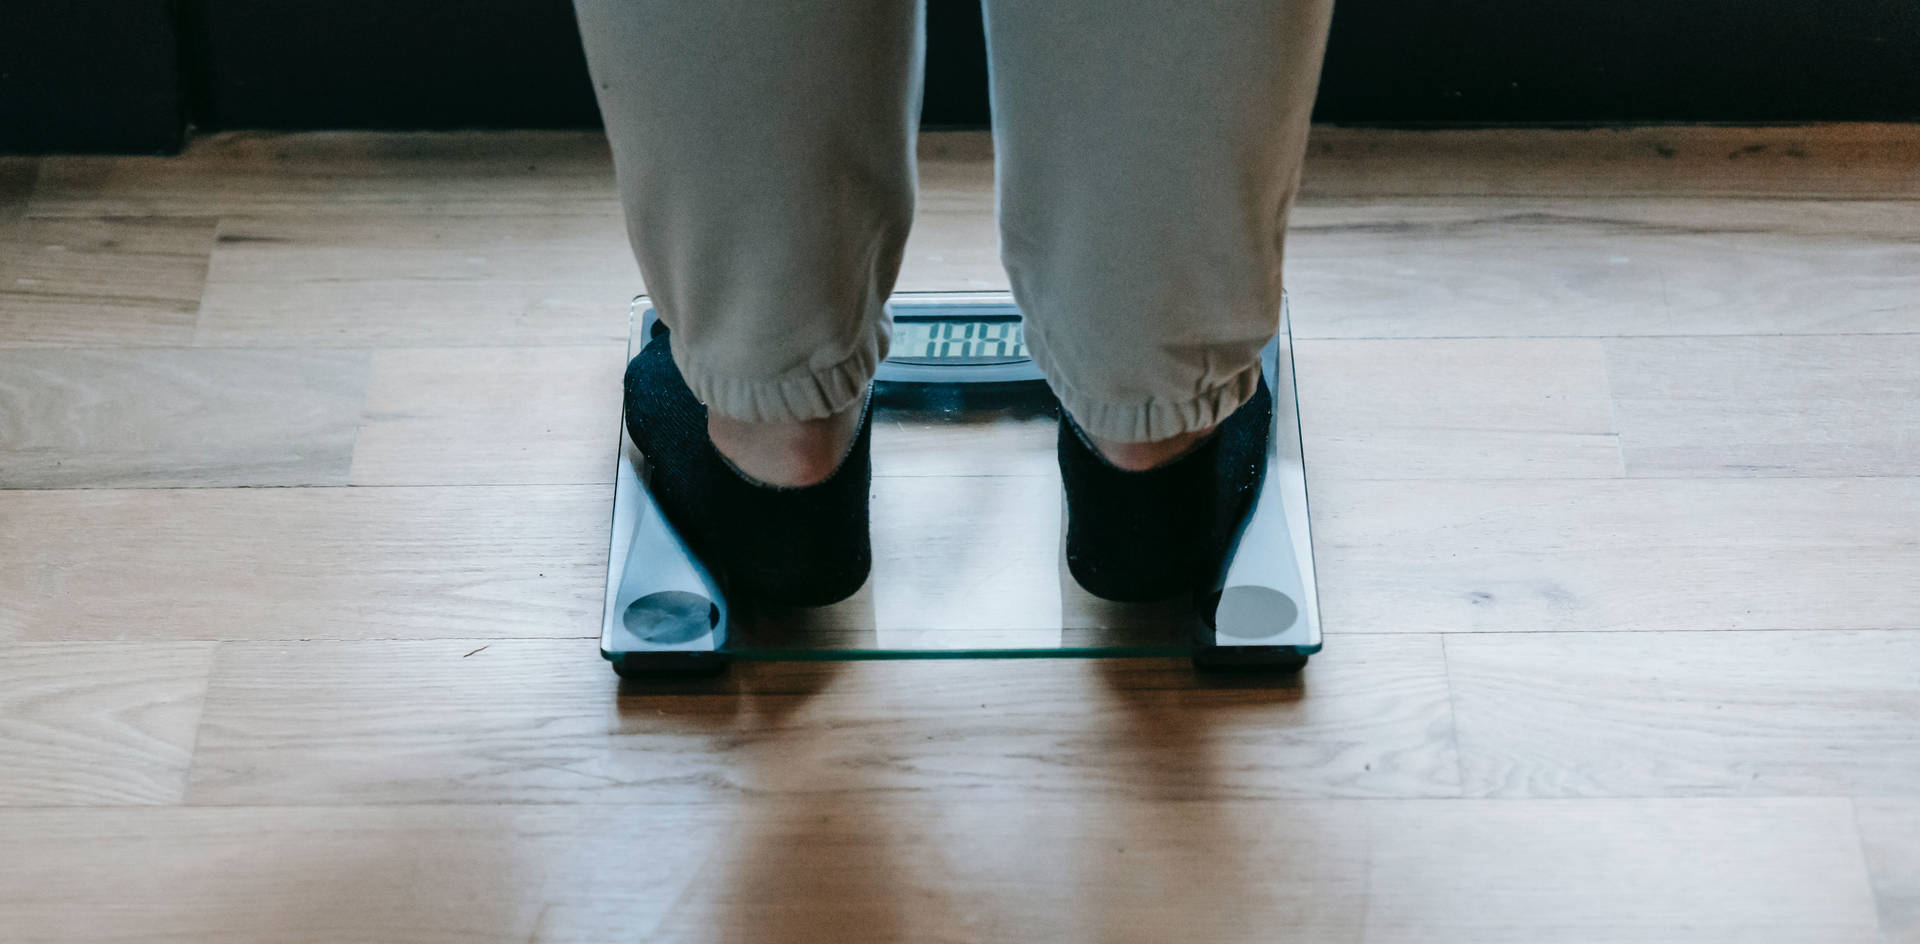 Lower Body Stepping On Scale Wallpaper